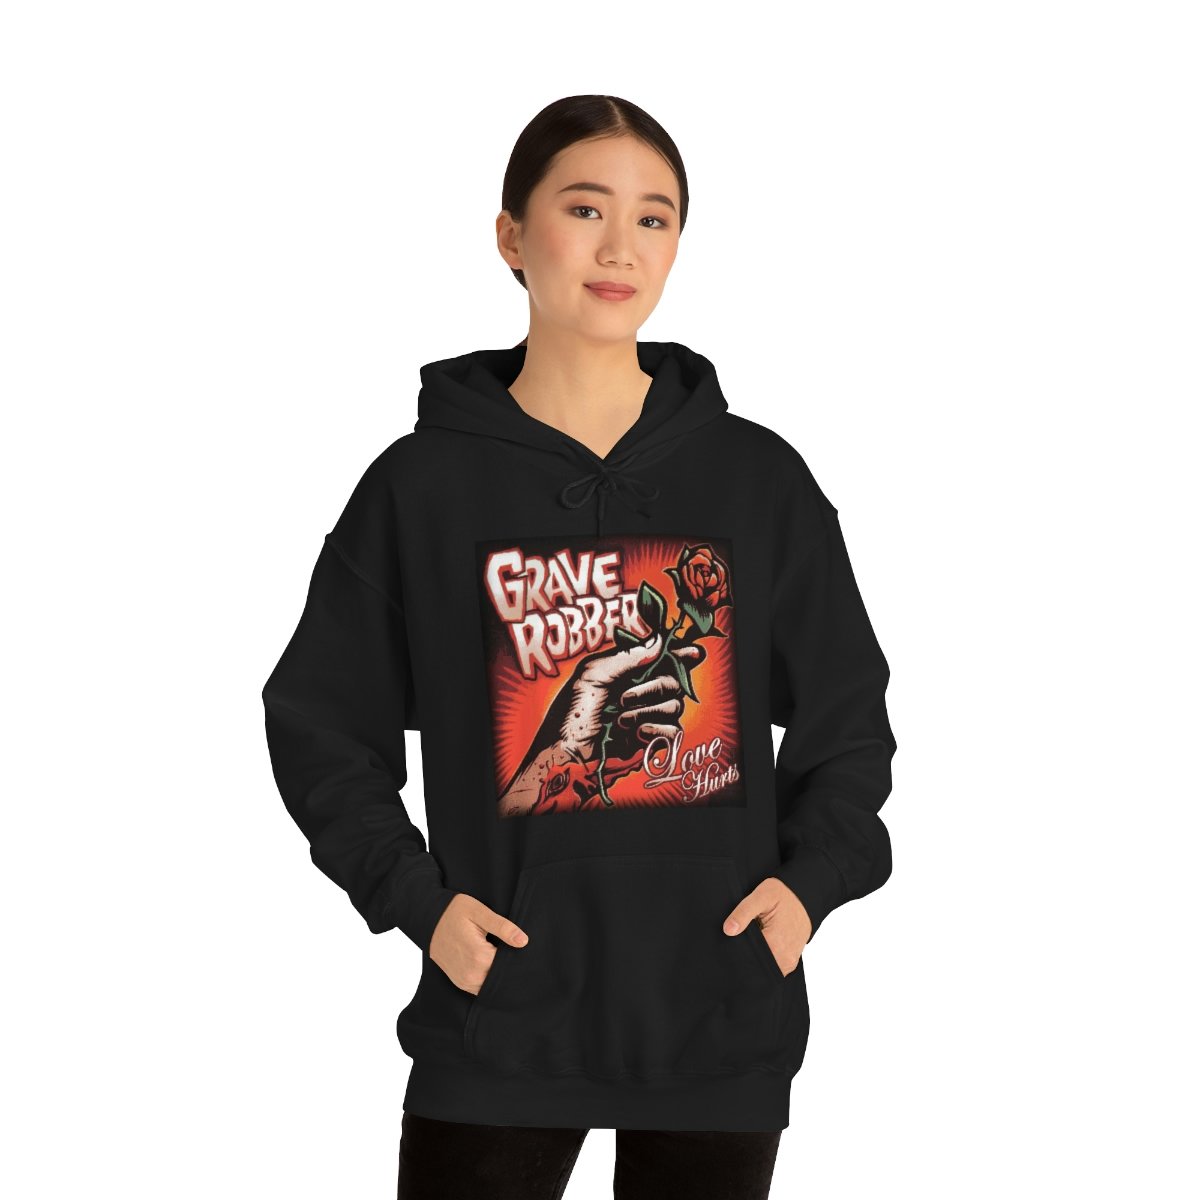 Grave Robber – Love Hurts Pullover Hooded Sweatshirt